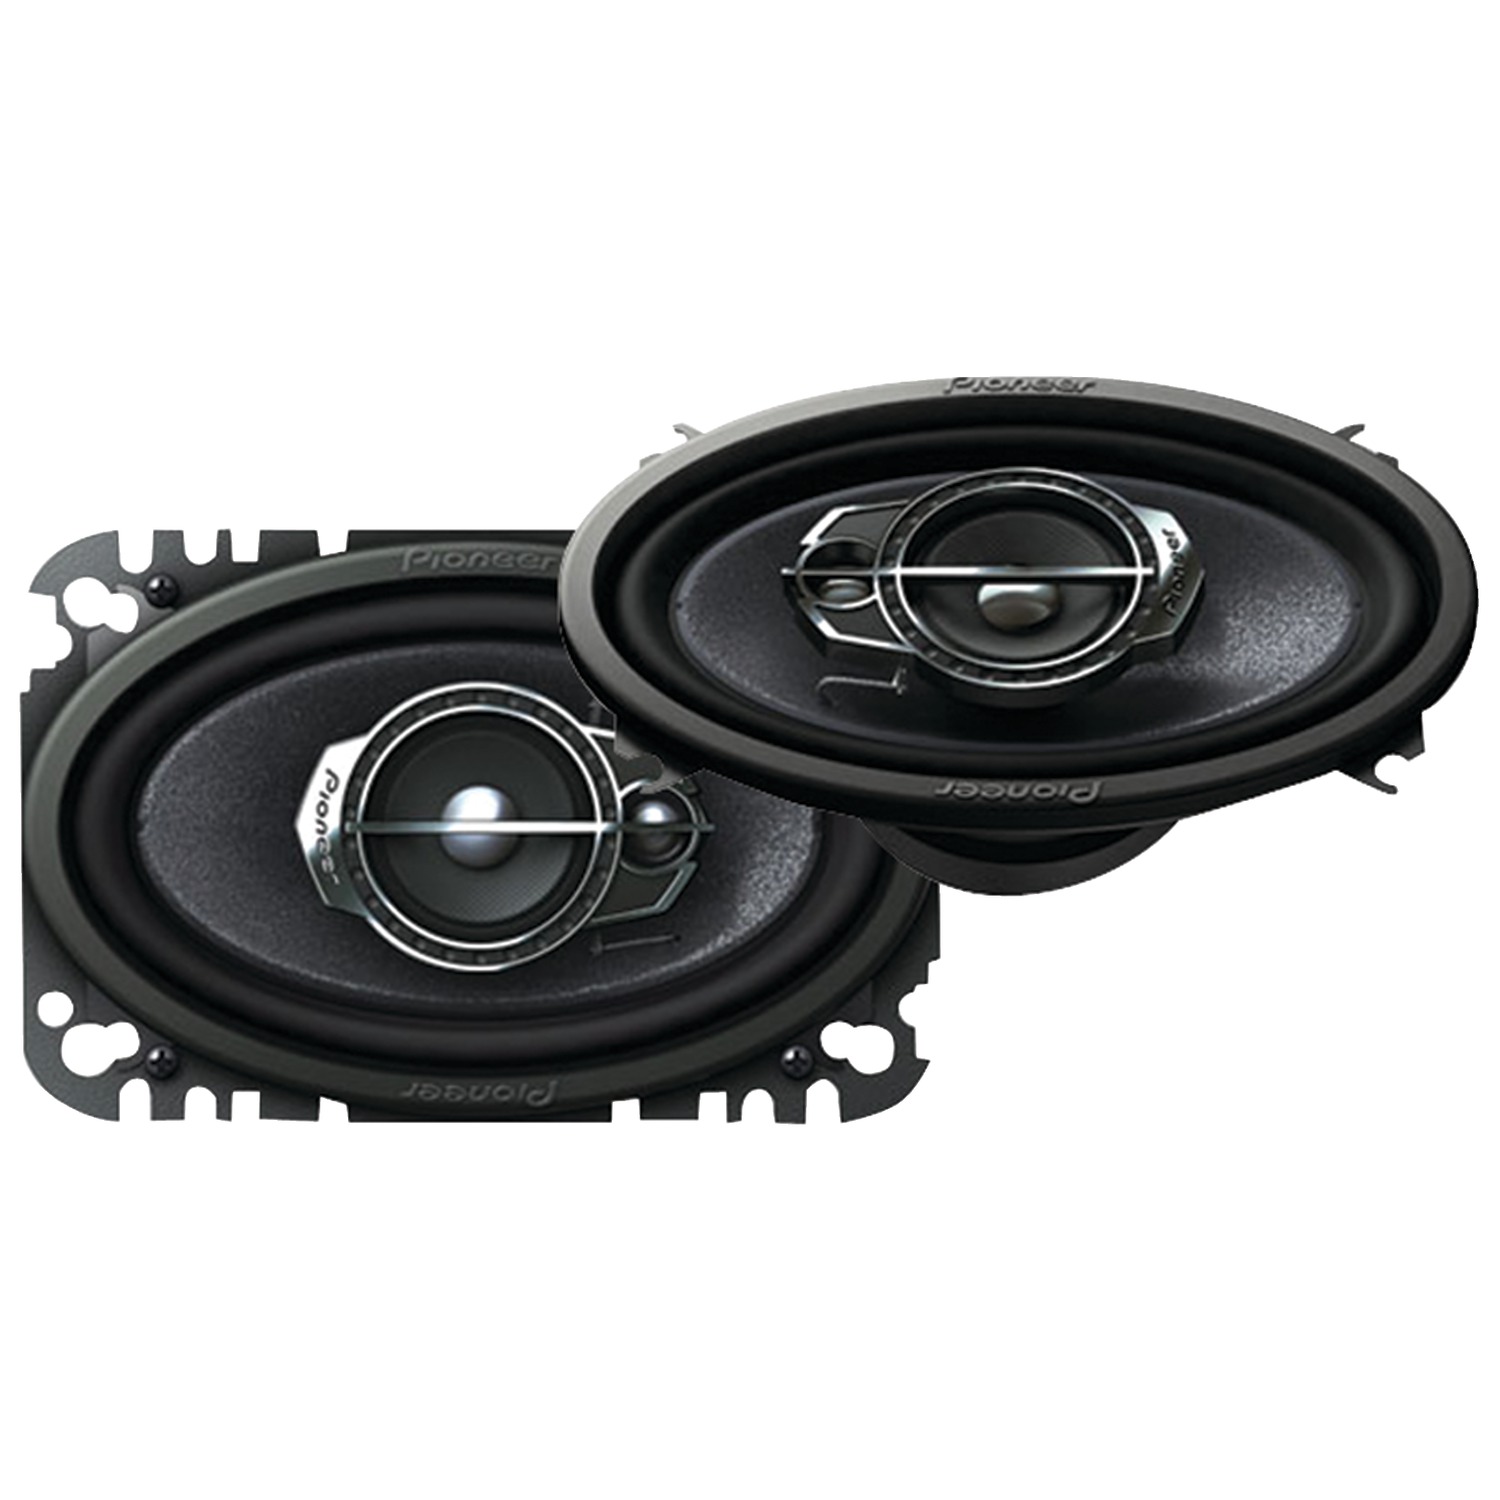 Pioneer 200W 4x6 Inch 3 Way 4 Ohms Coaxial Car Audio Speakers Pair | TS-A4676R - image 2 of 5